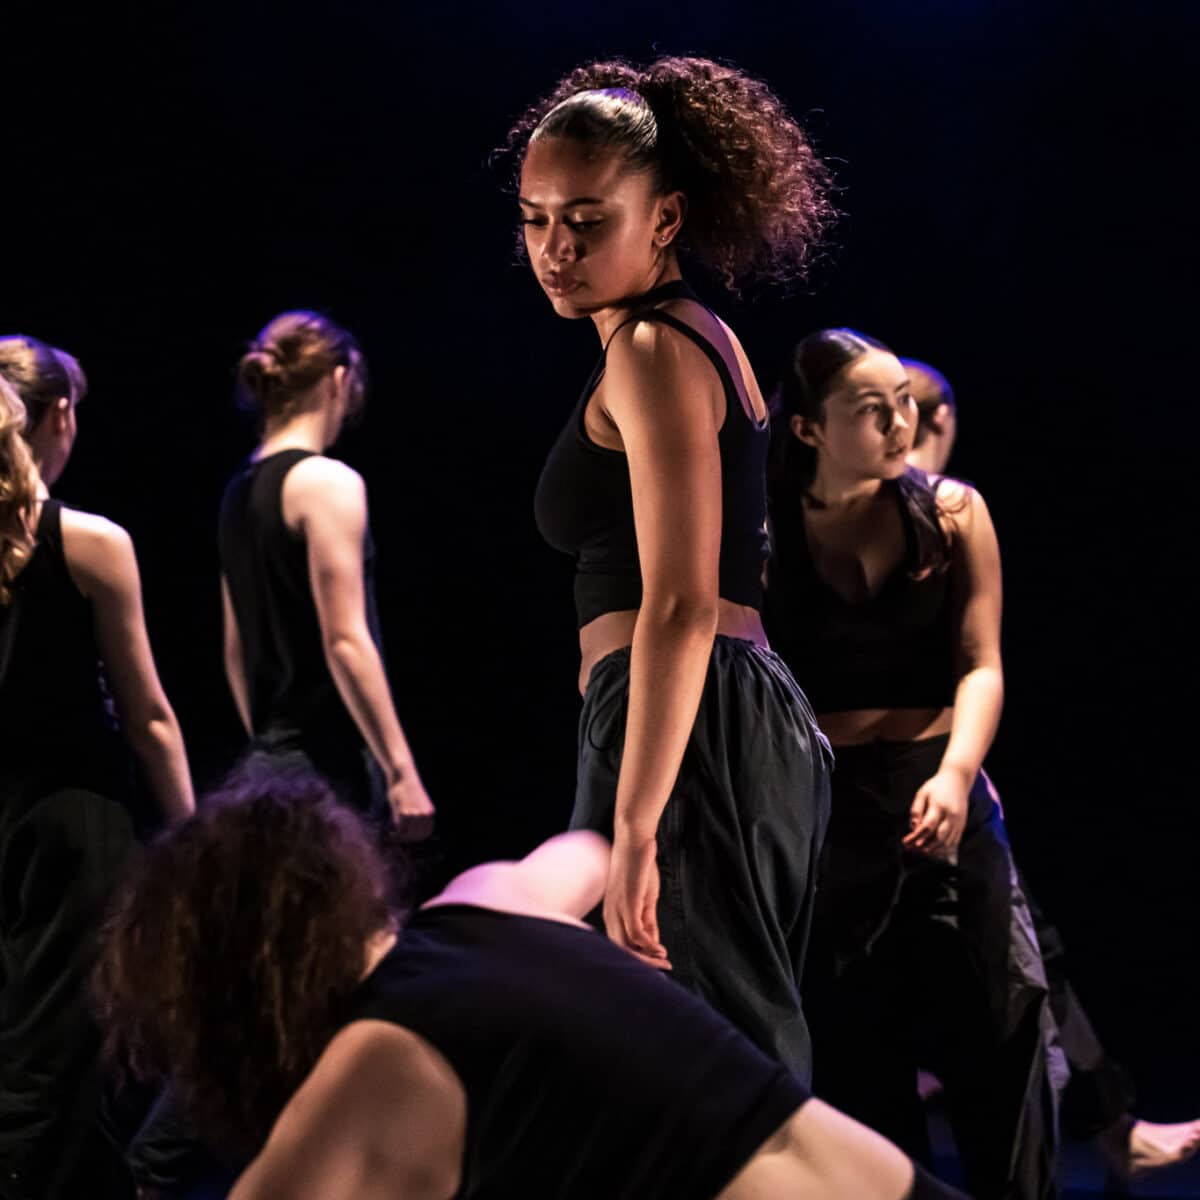 Six young dancers perform a pensive piece in a dim lit background.